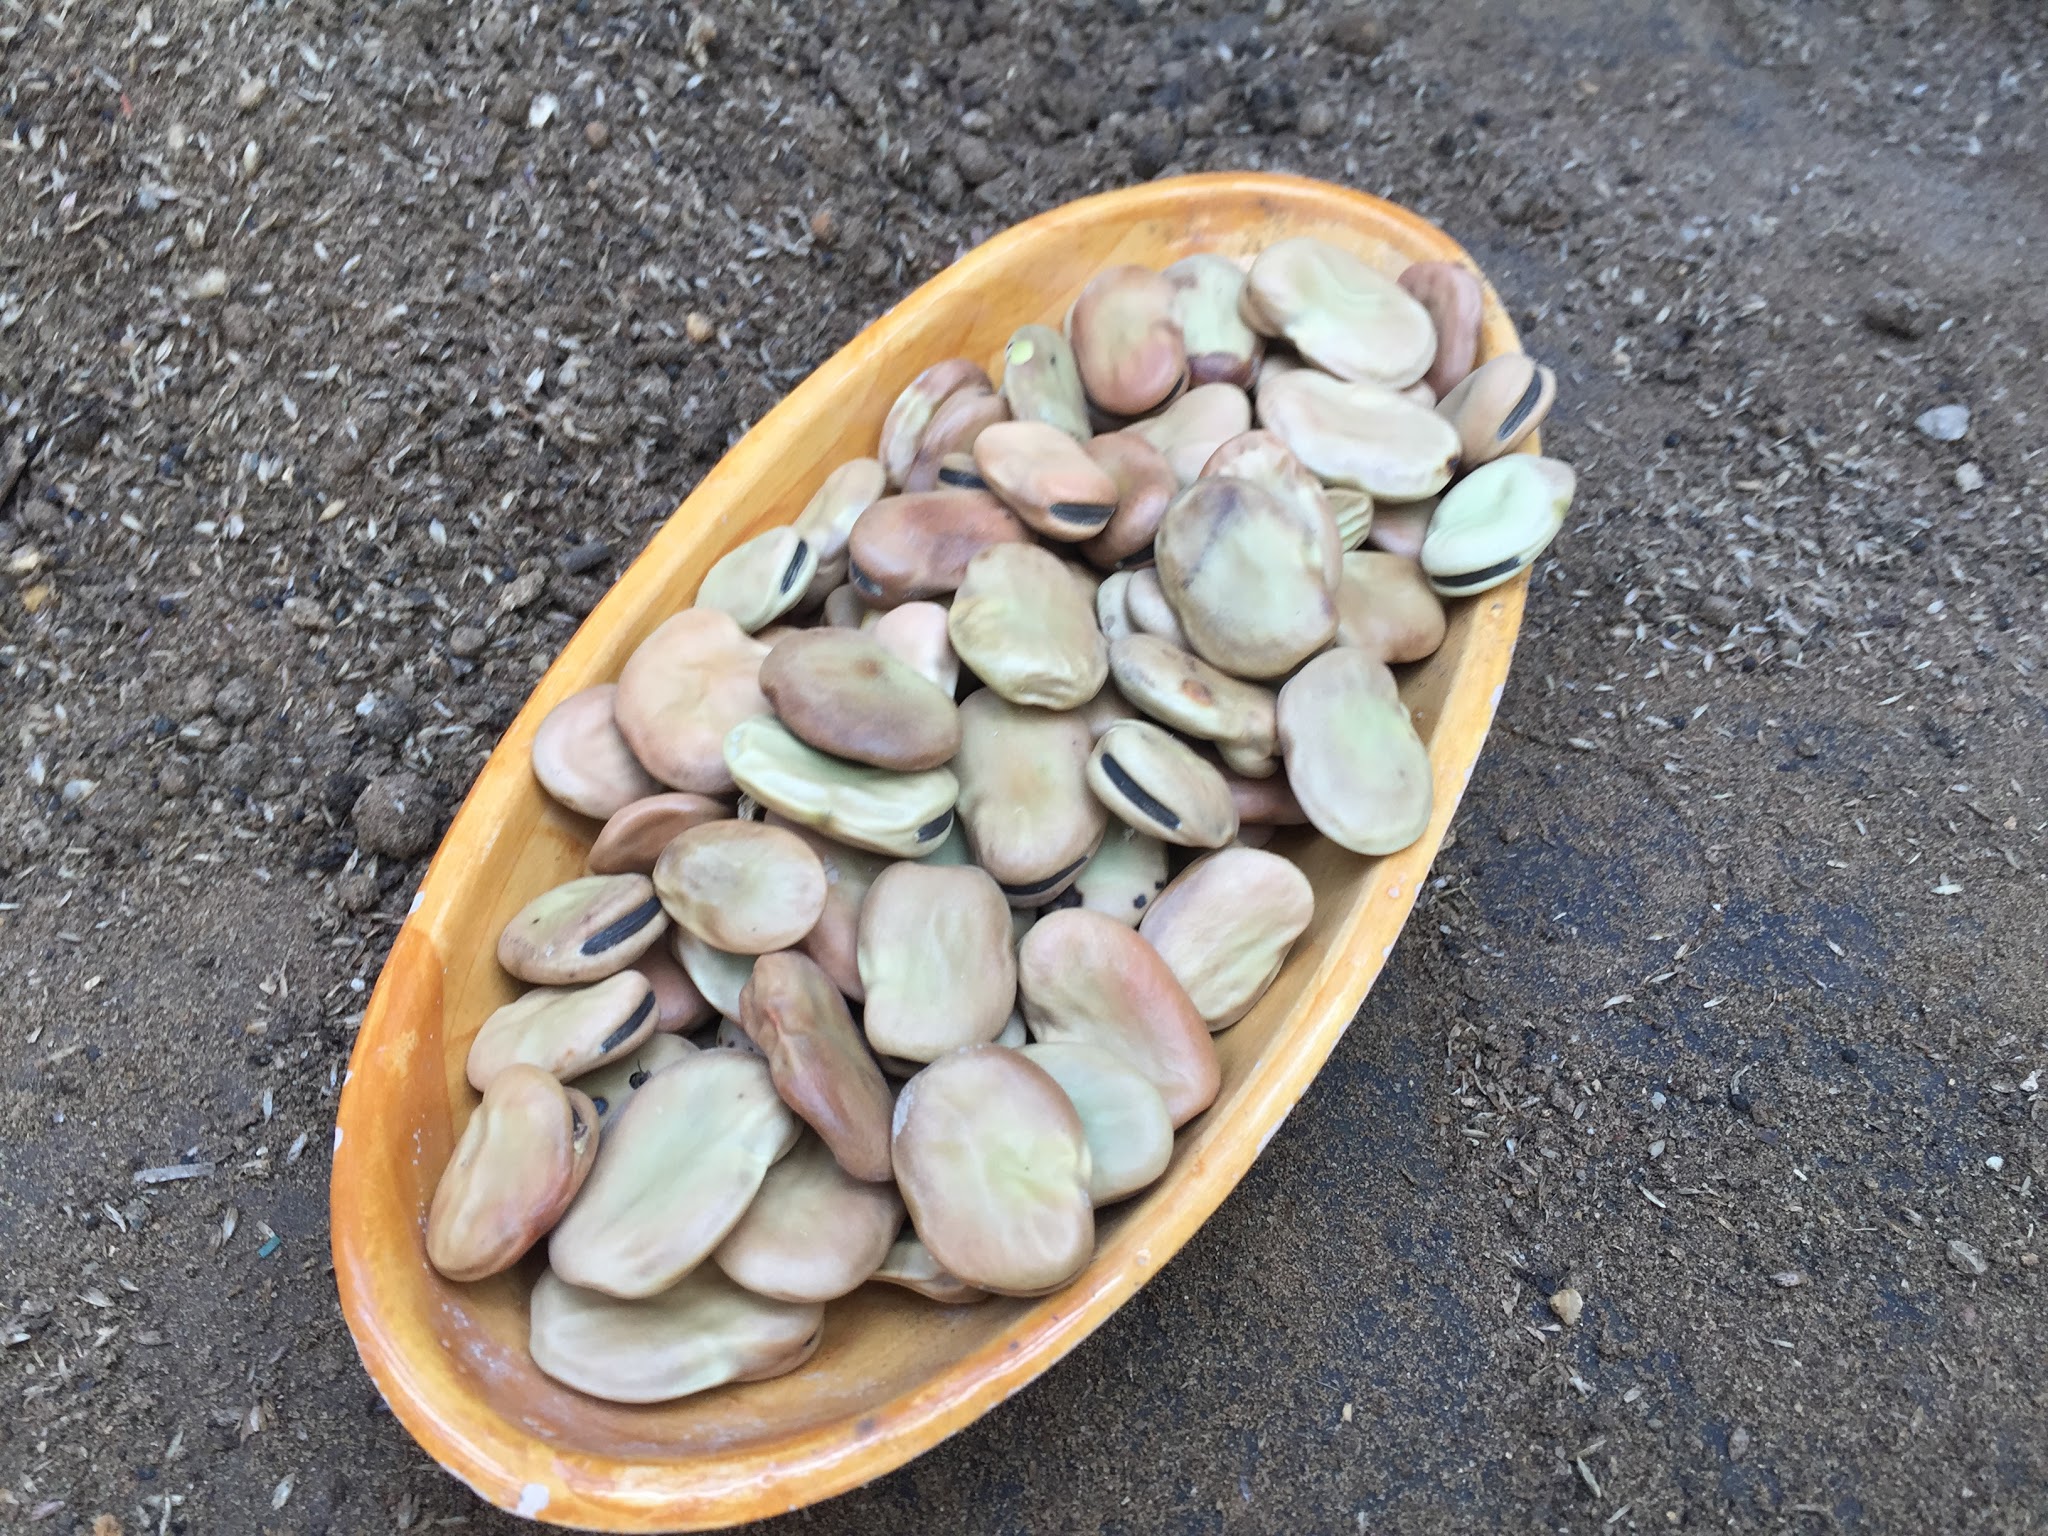 Broad bean seeds can be sown directly into the ground, or containers outside. Performs well in low light conditions and is hardy, this broad bean is great.